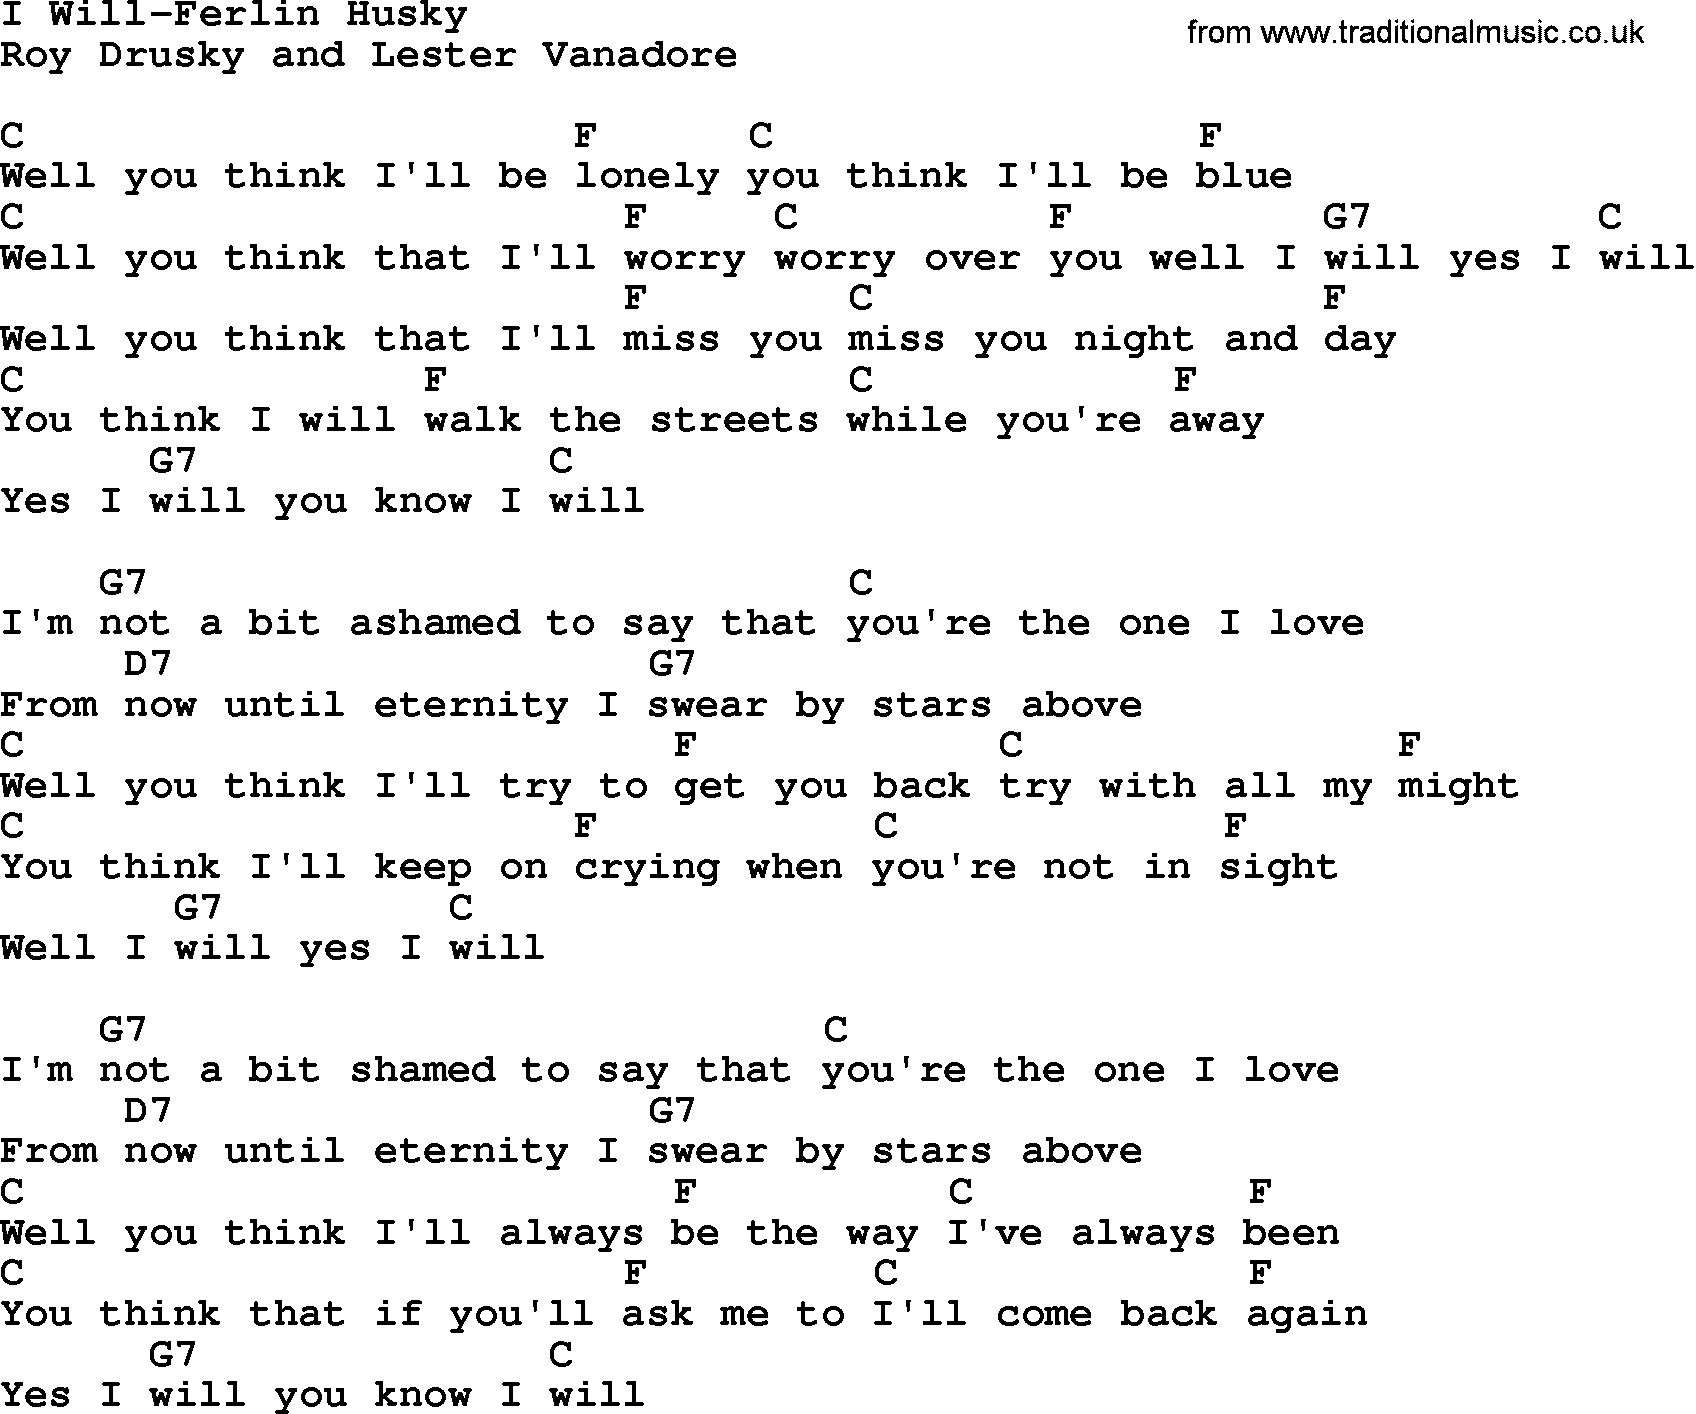 Country music song: I Will-Ferlin Husky lyrics and chords